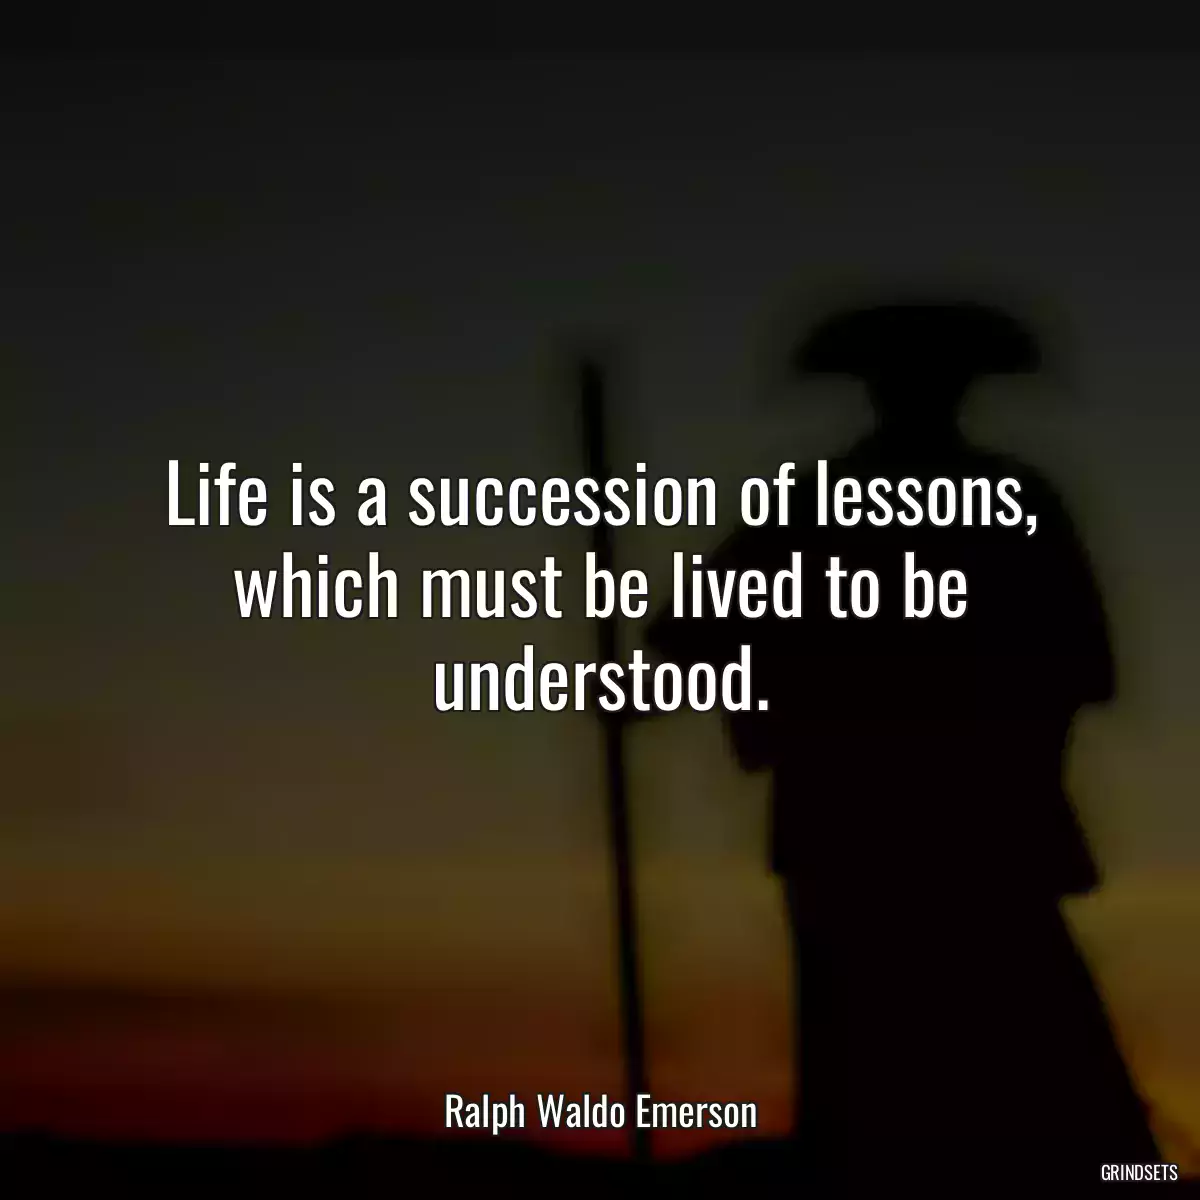 Life is a succession of lessons, which must be lived to be understood.